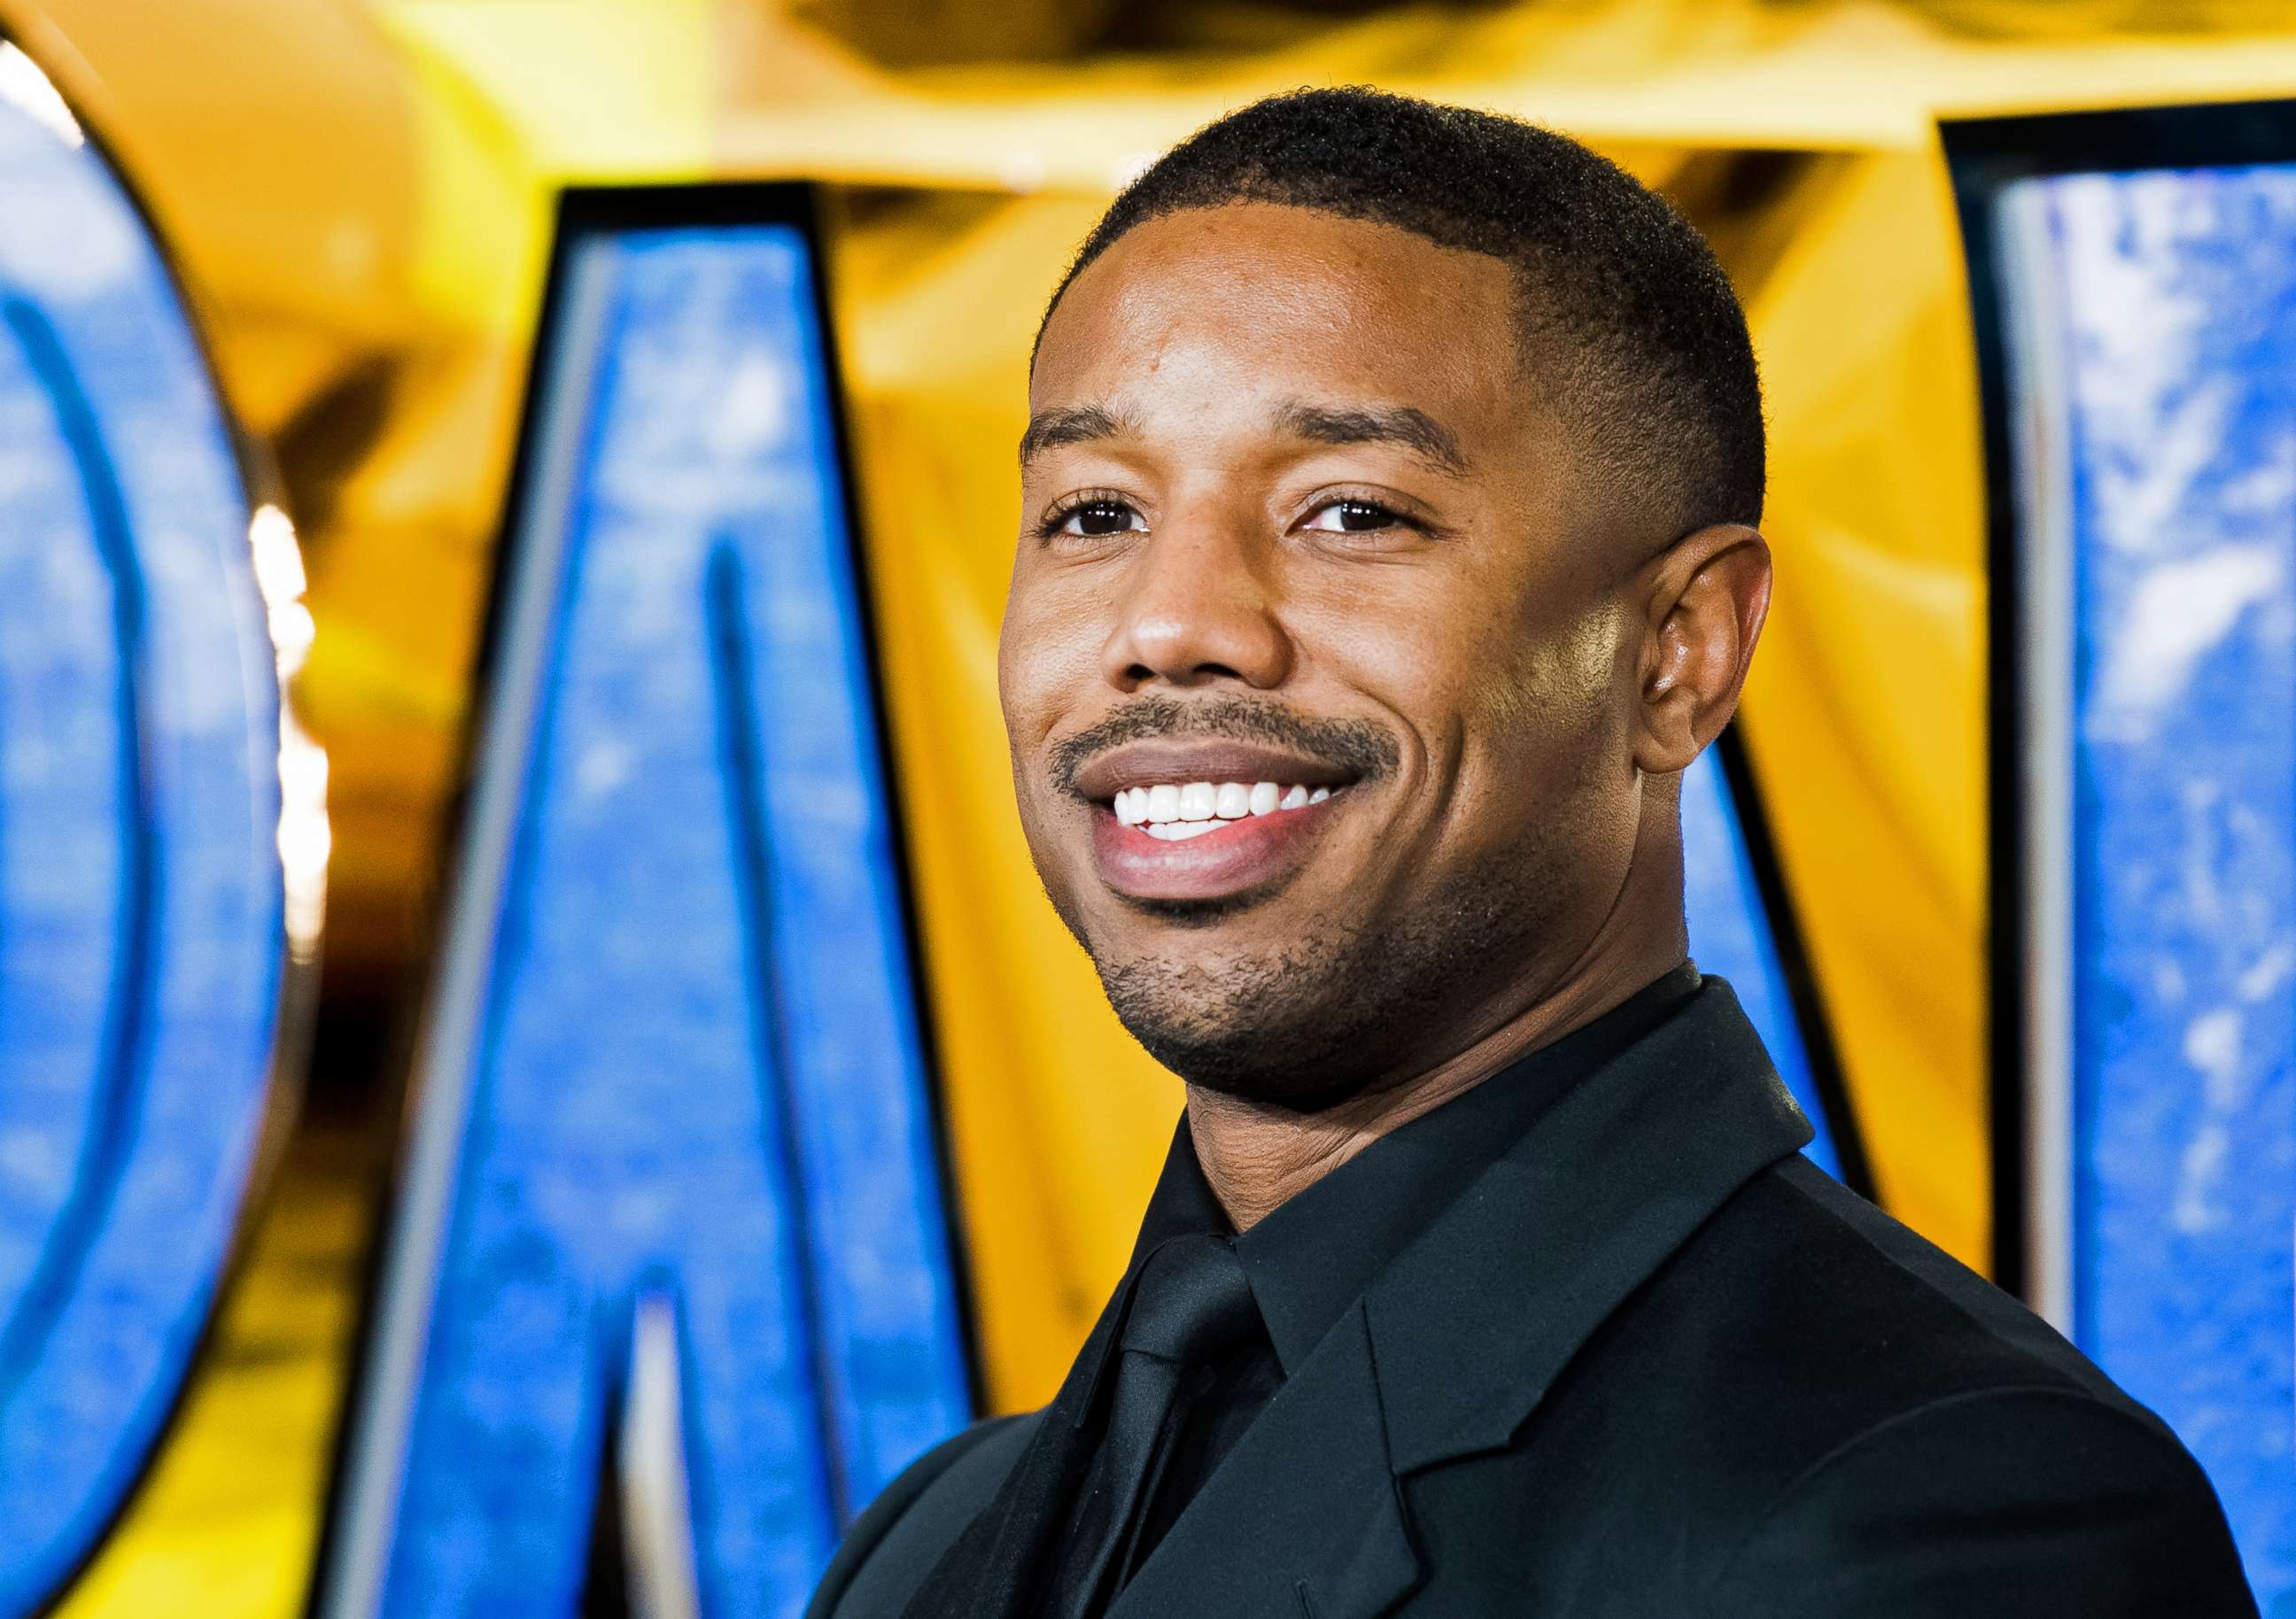 PHOTO: Michael B. Jordan attends the European Premiere of "Black Panther" at Eventim Apollo on Feb. 8, 2018 in London.